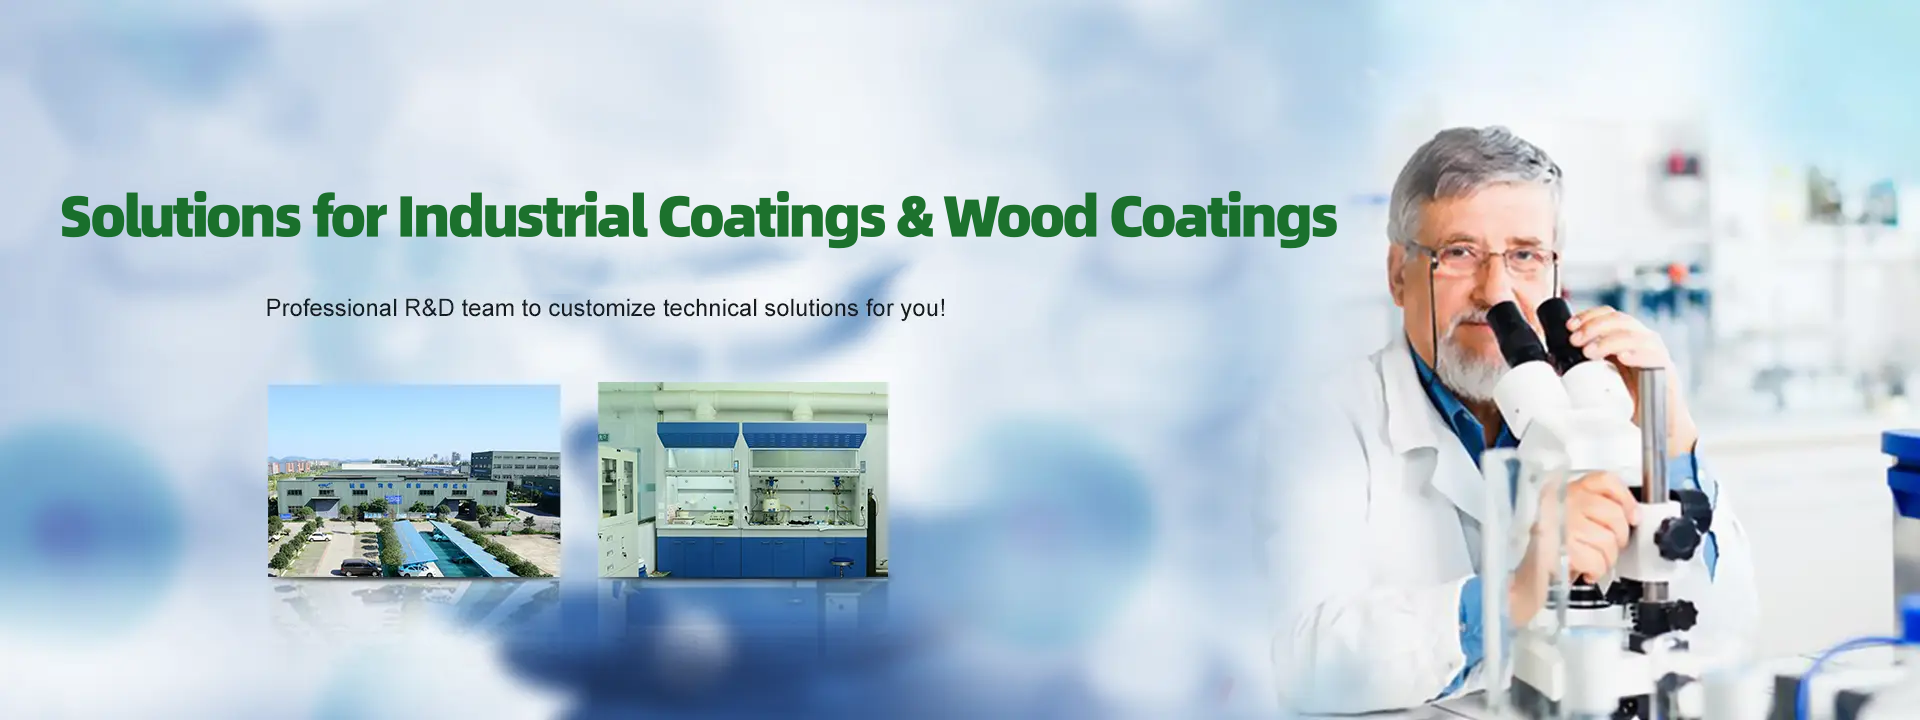 SOLUTIONS FOR WOOD COATINGS修改_副本